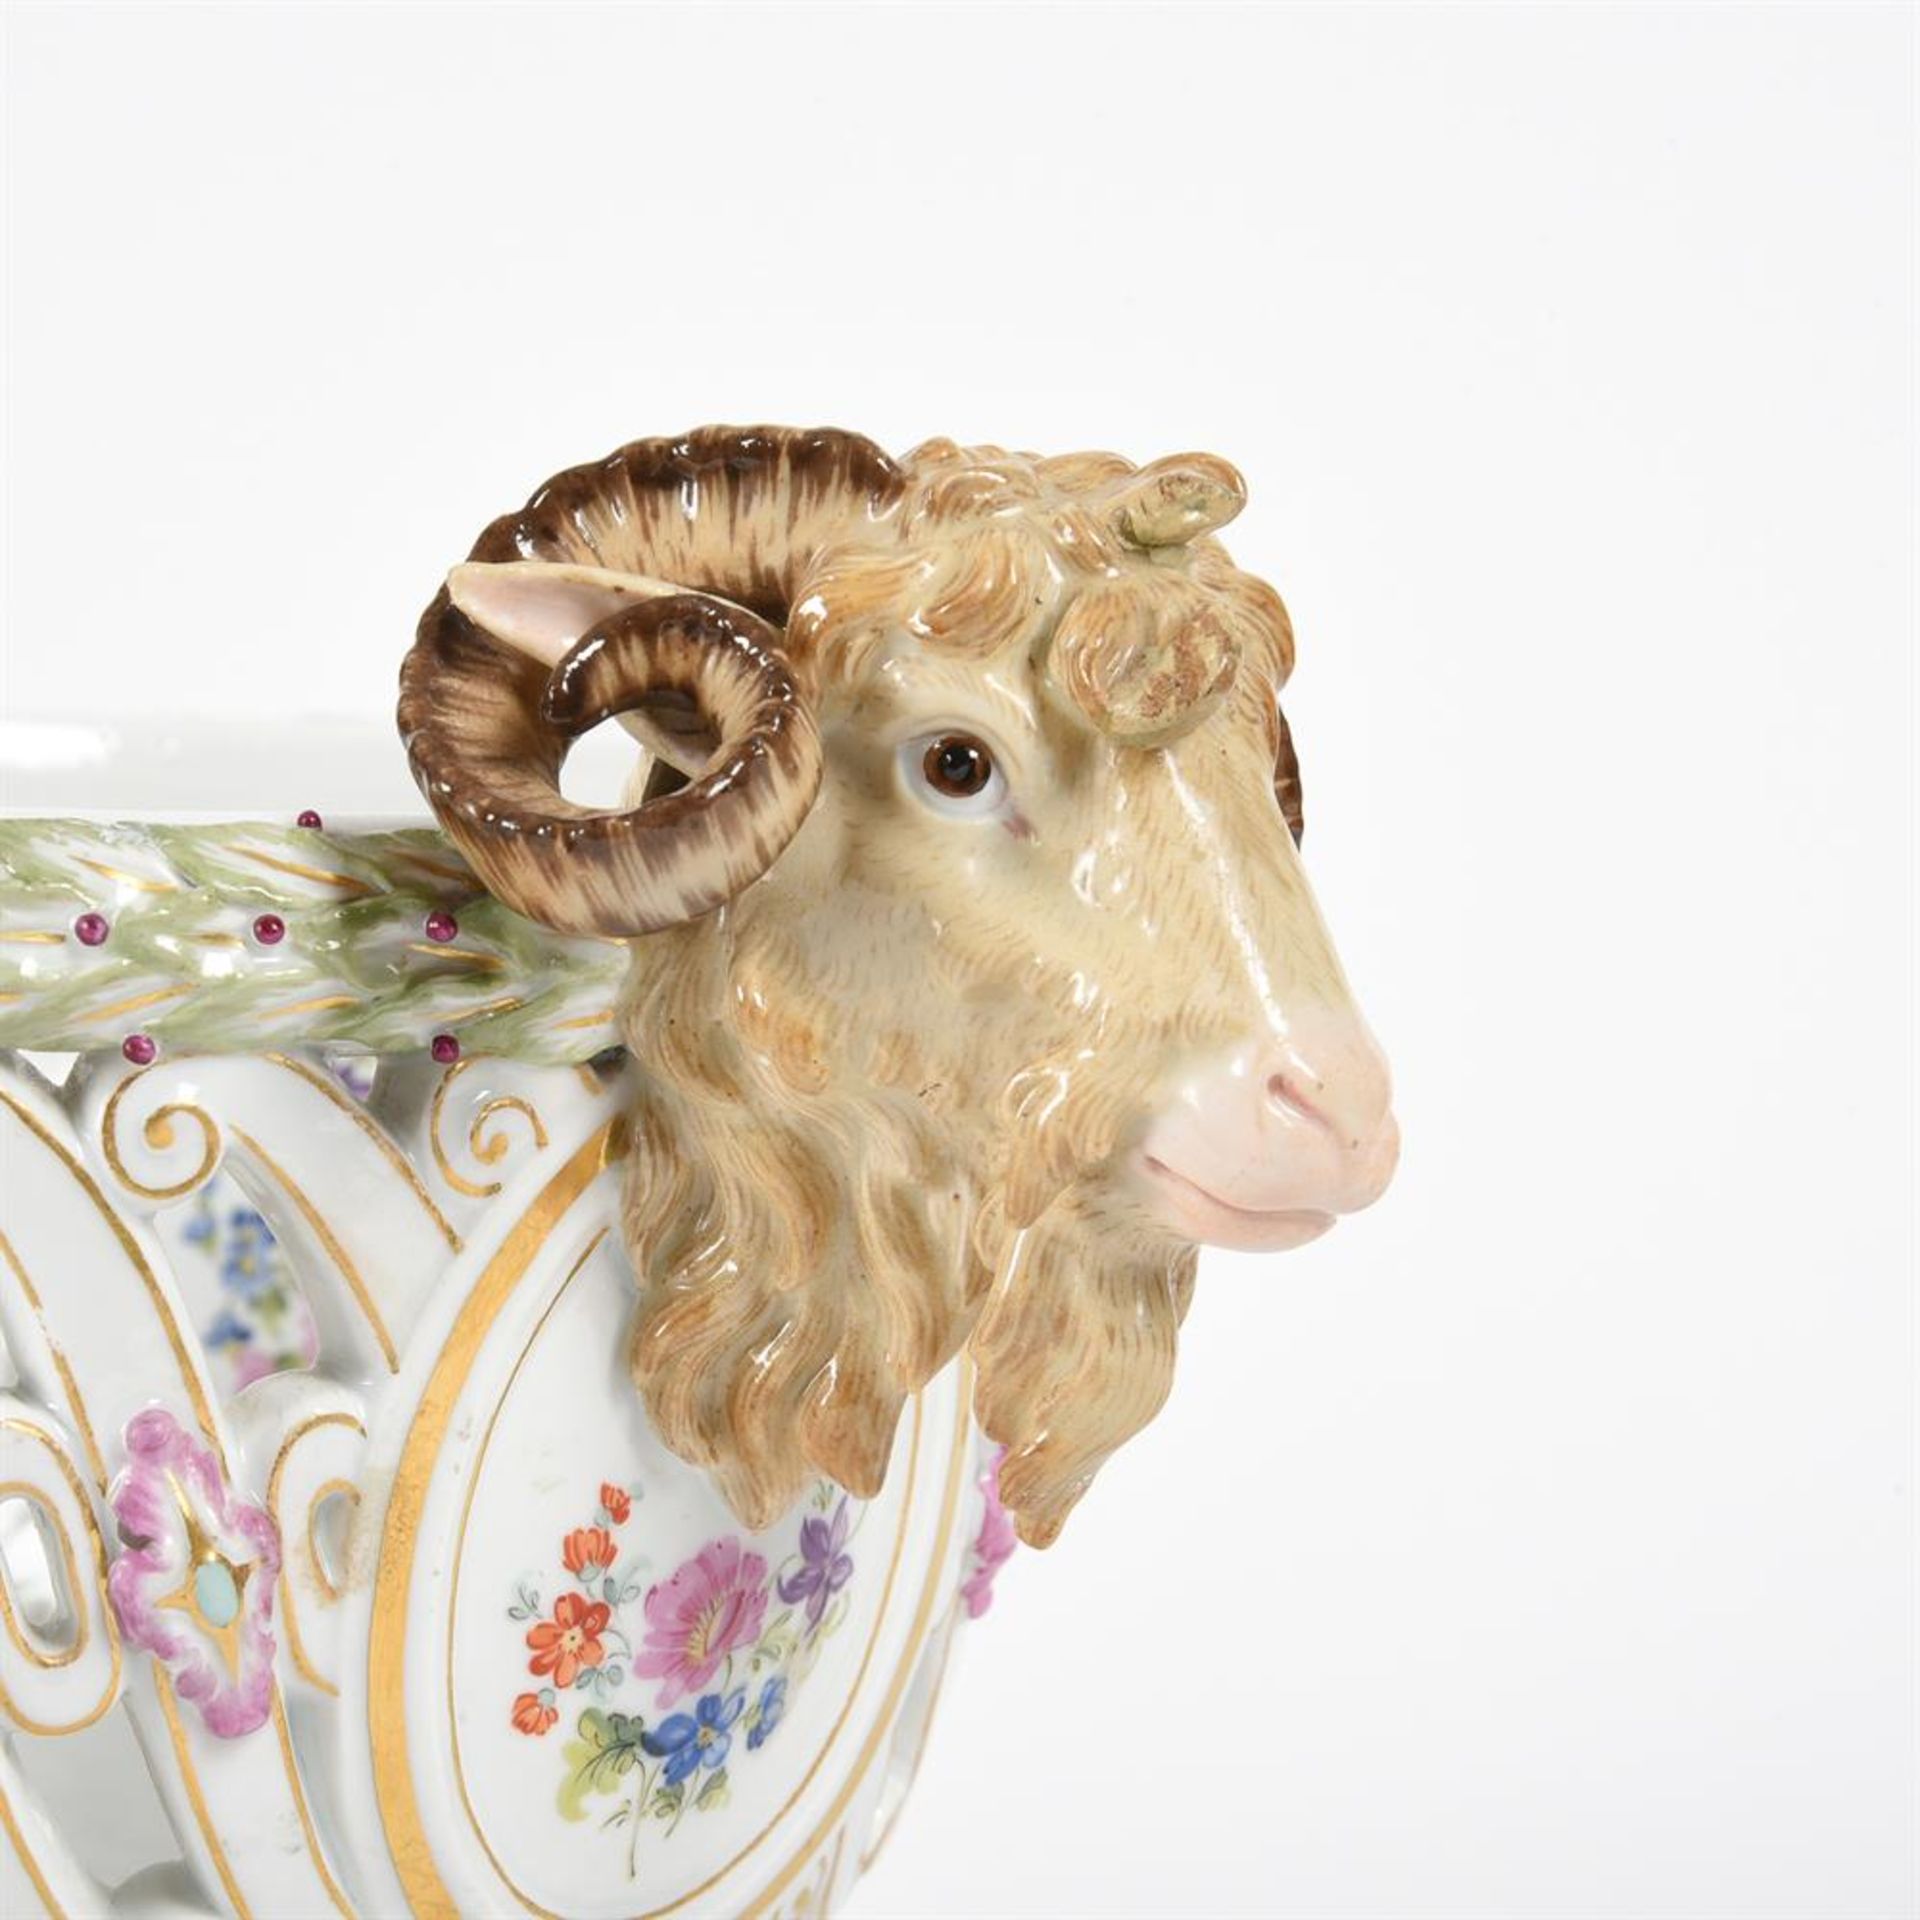 A MEISSEN PORCELAIN TWO-HANDLED PIERCED CENTRE BASKET, LATE 19TH CENTURY - Image 4 of 5